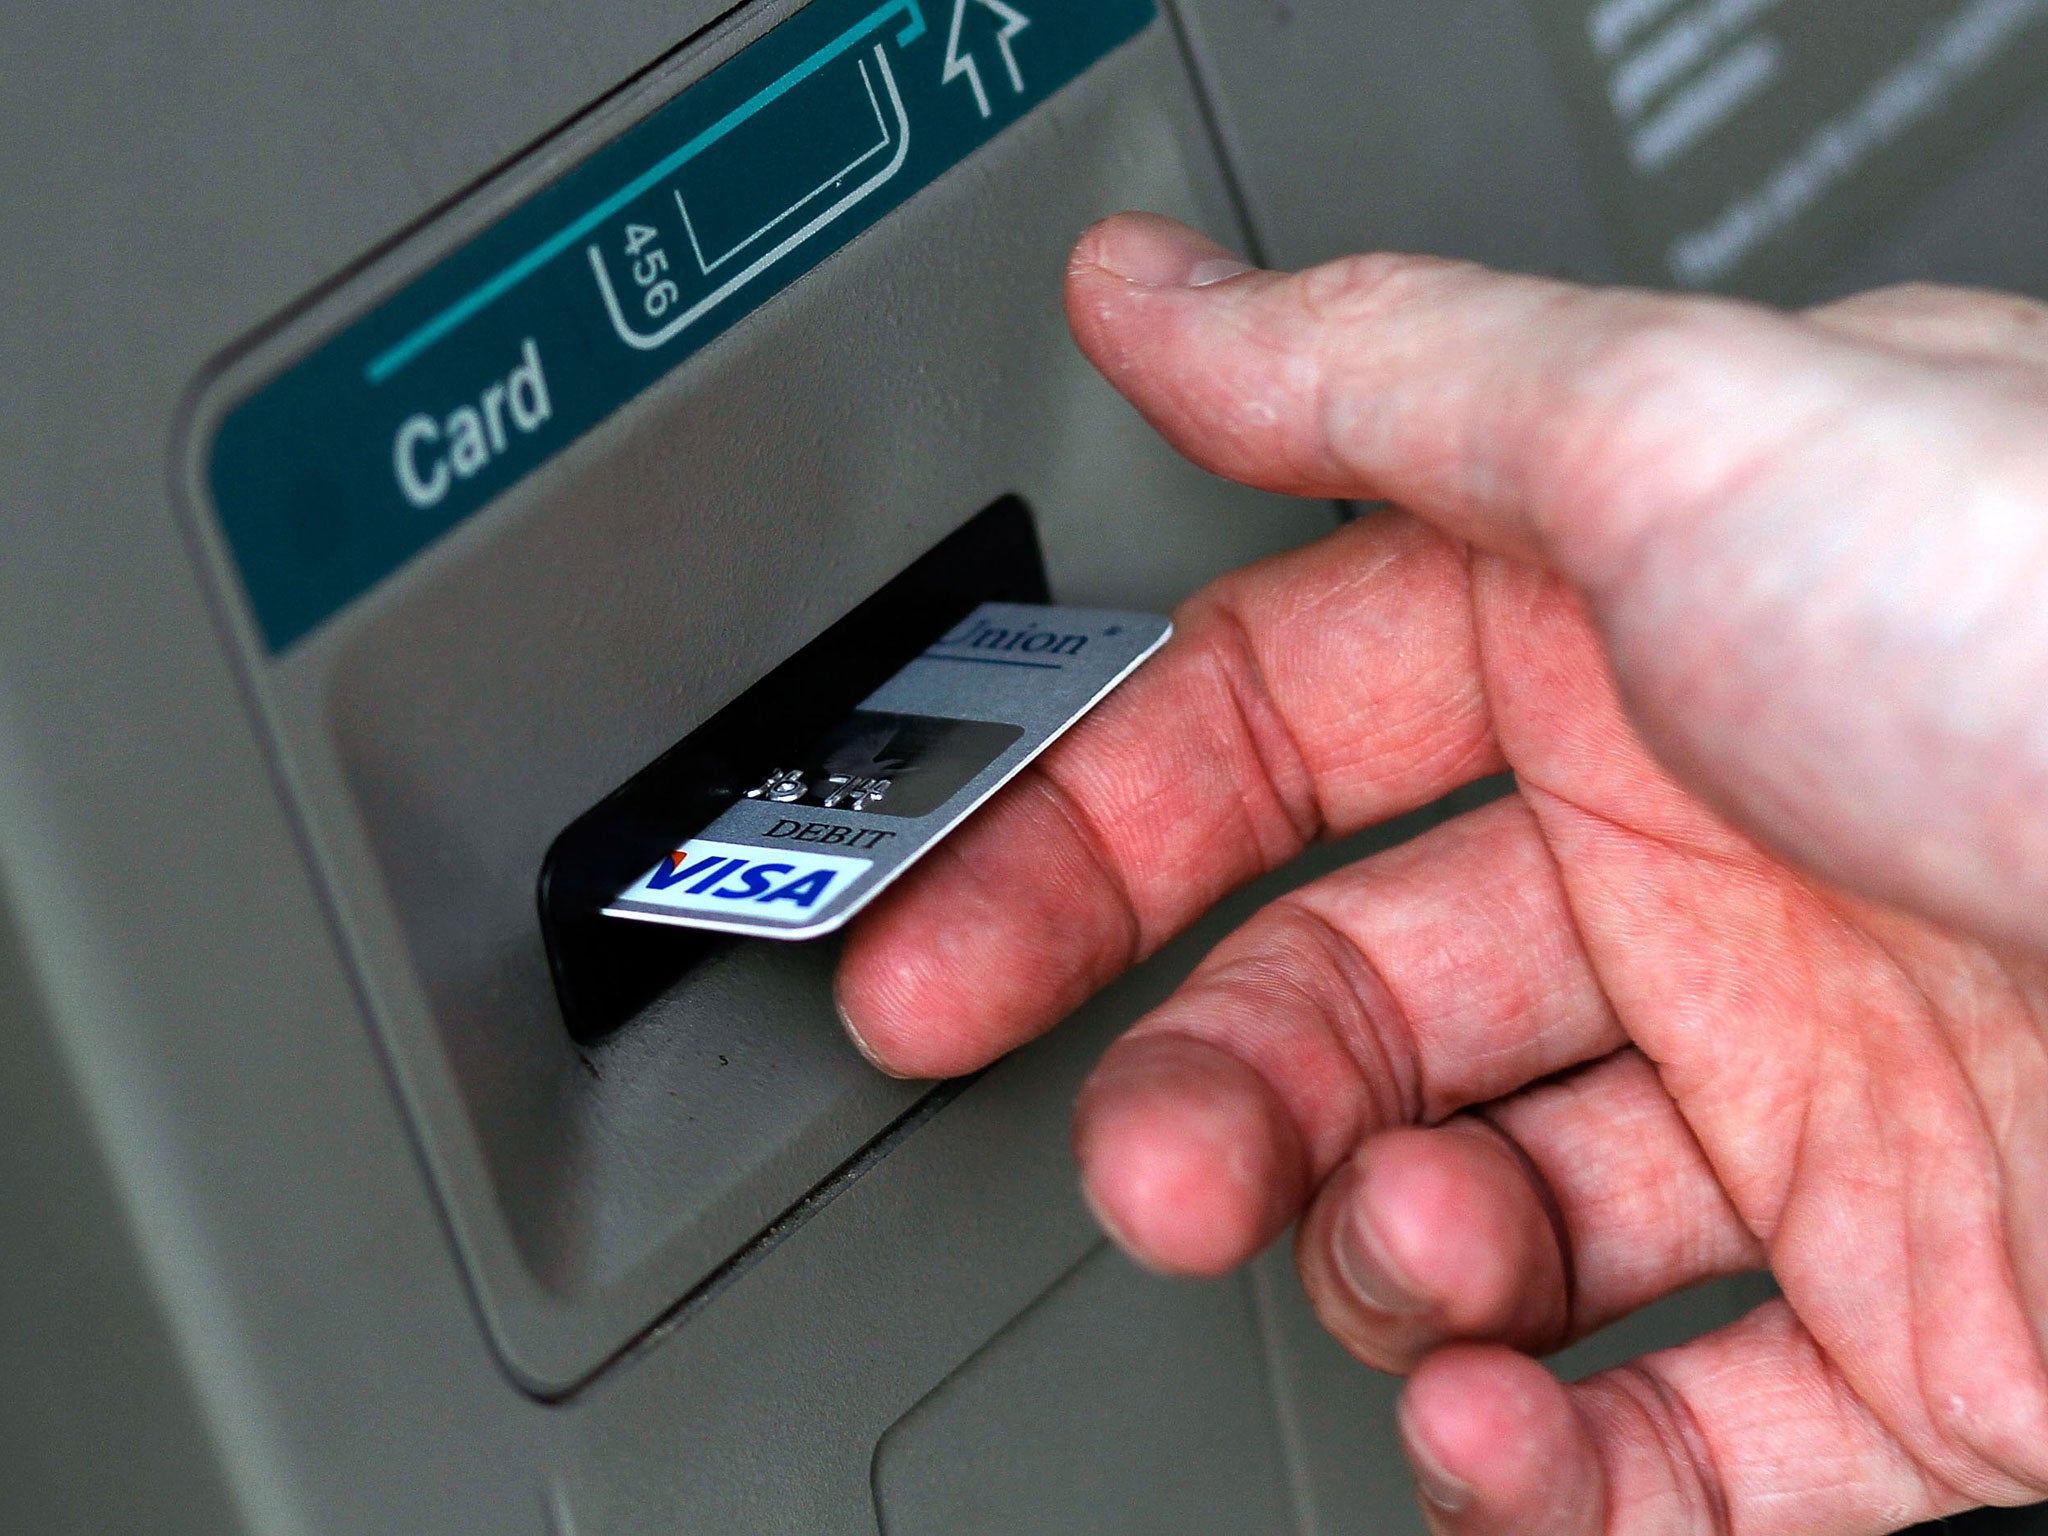 Figures obtained from the Link network by the Guardian newspaper showed there were 269 low-income areas without a free ATM nearby